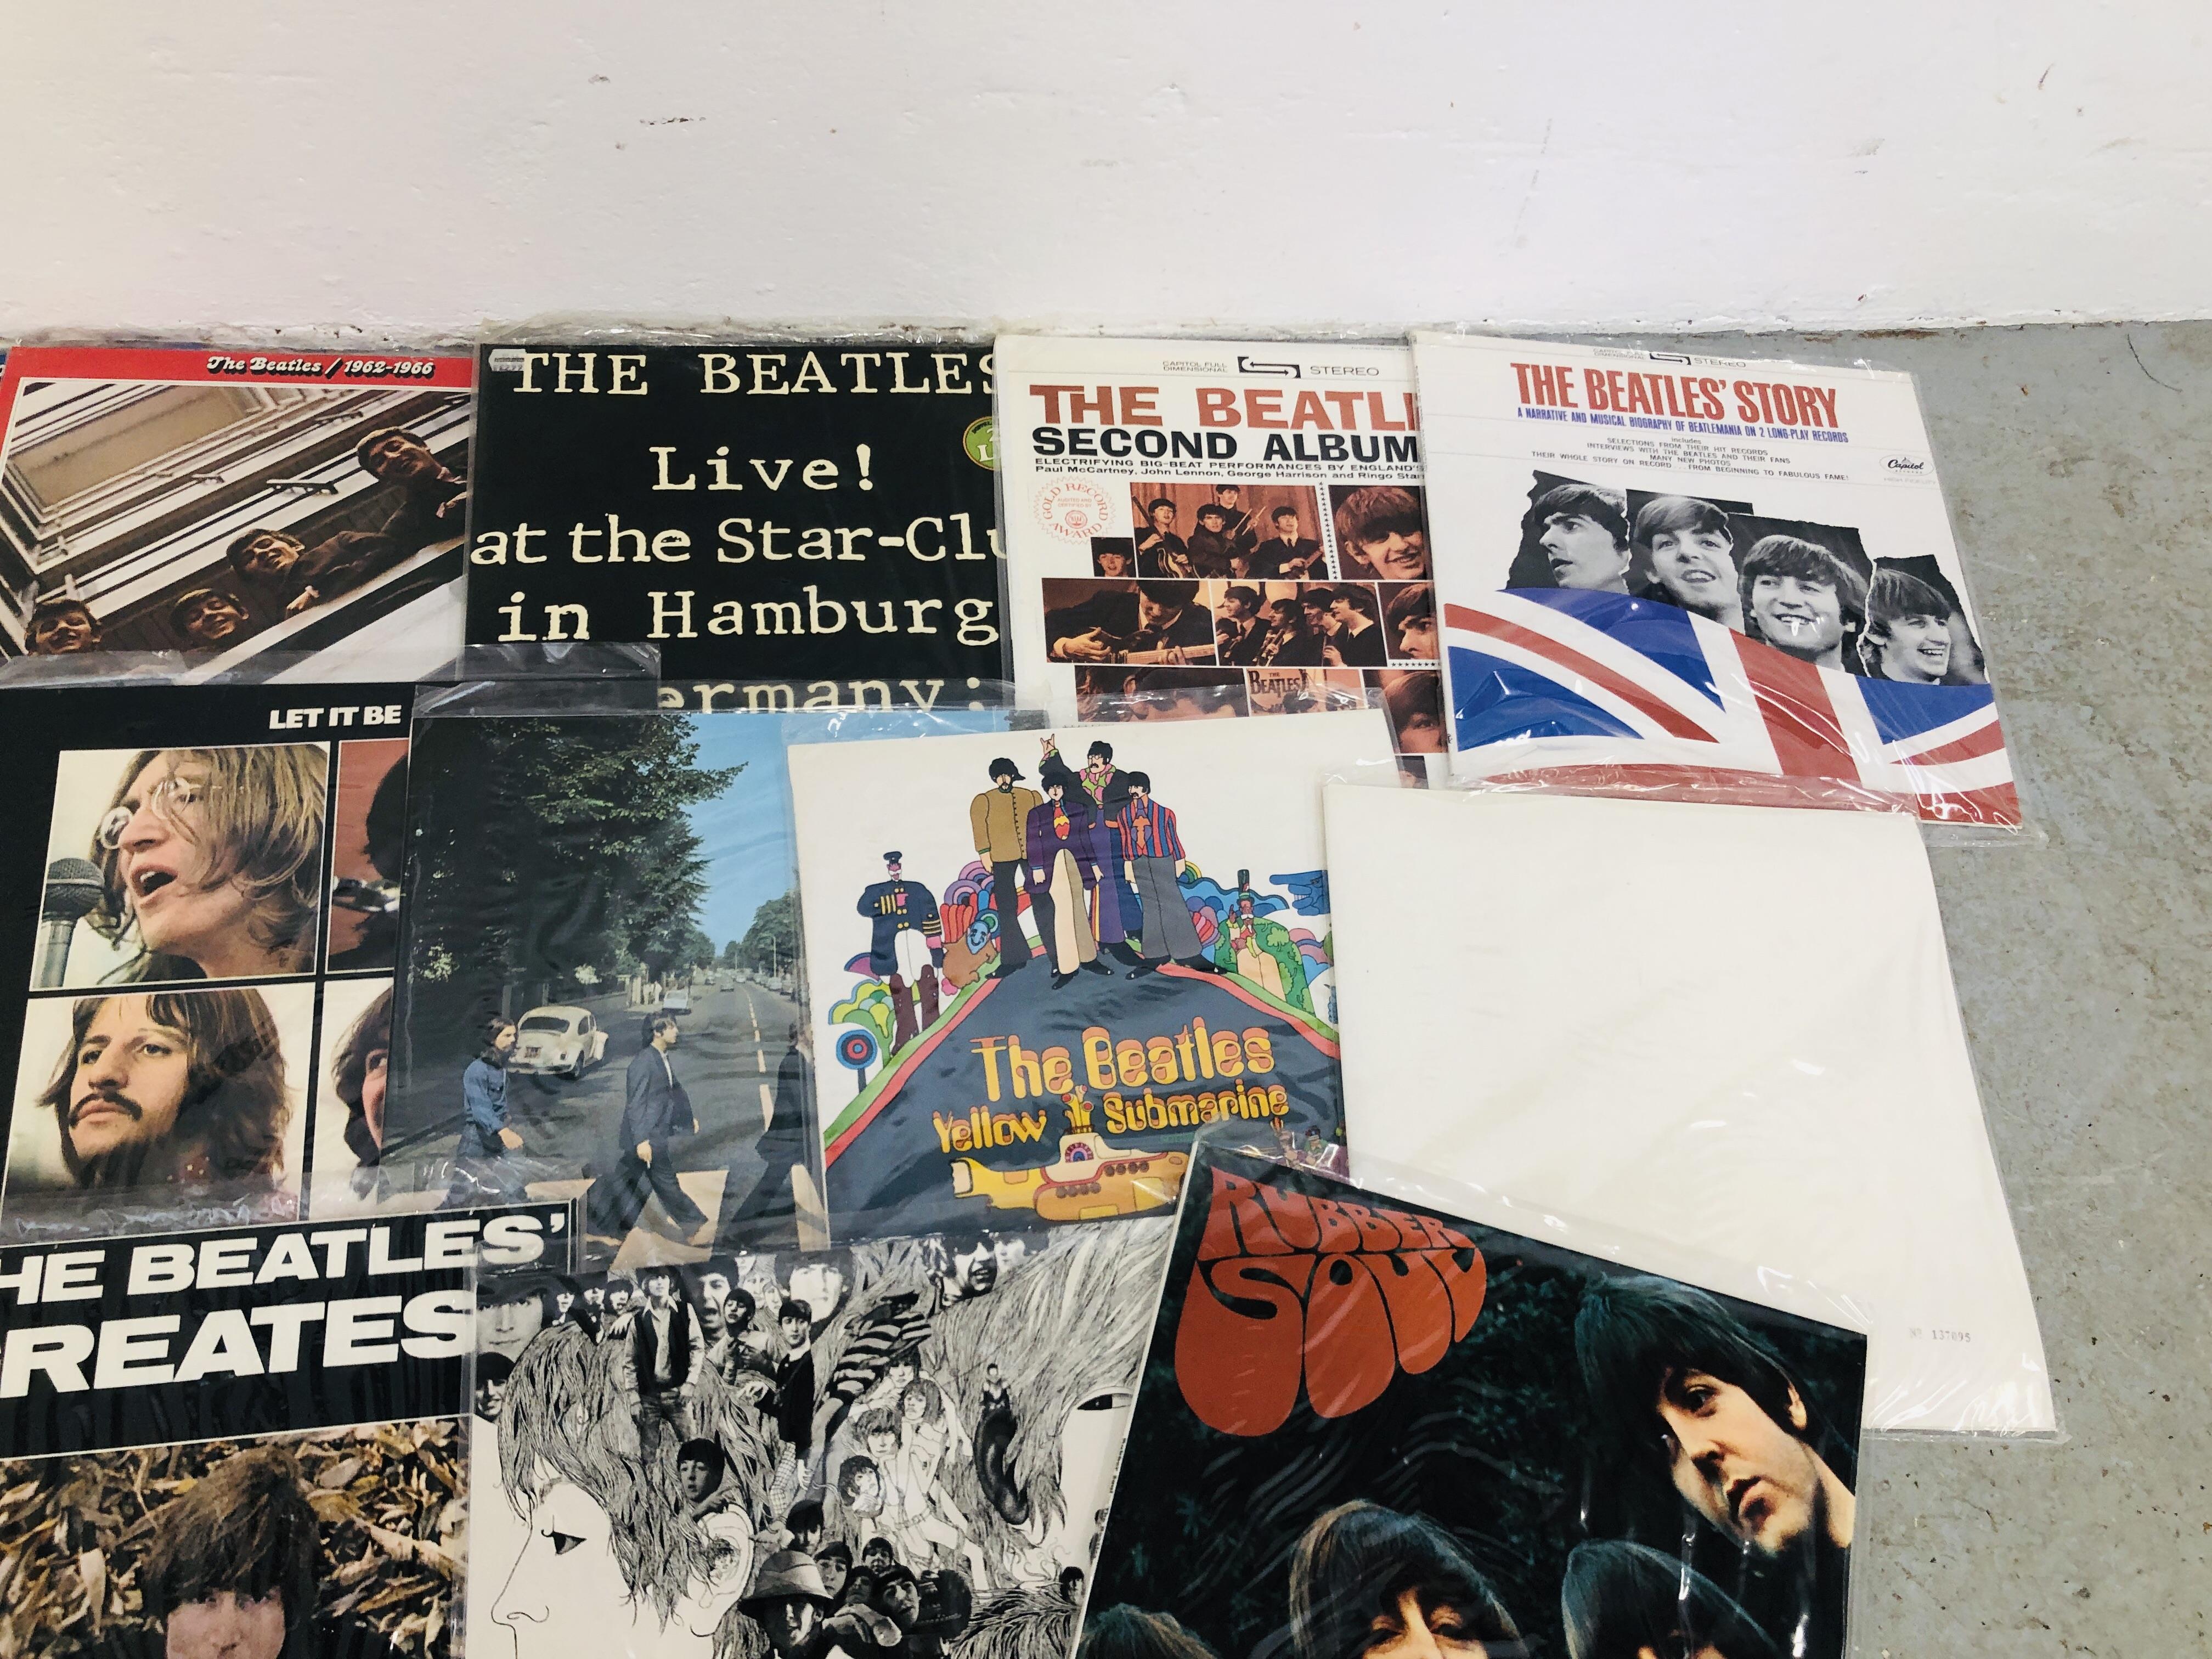 CASE CONTAINING APPROX 26 RECORD ALBUMS "THE BEATLES" RELATED TO INCLUDE RARITIES, ROCK AND ROLL, - Image 4 of 5